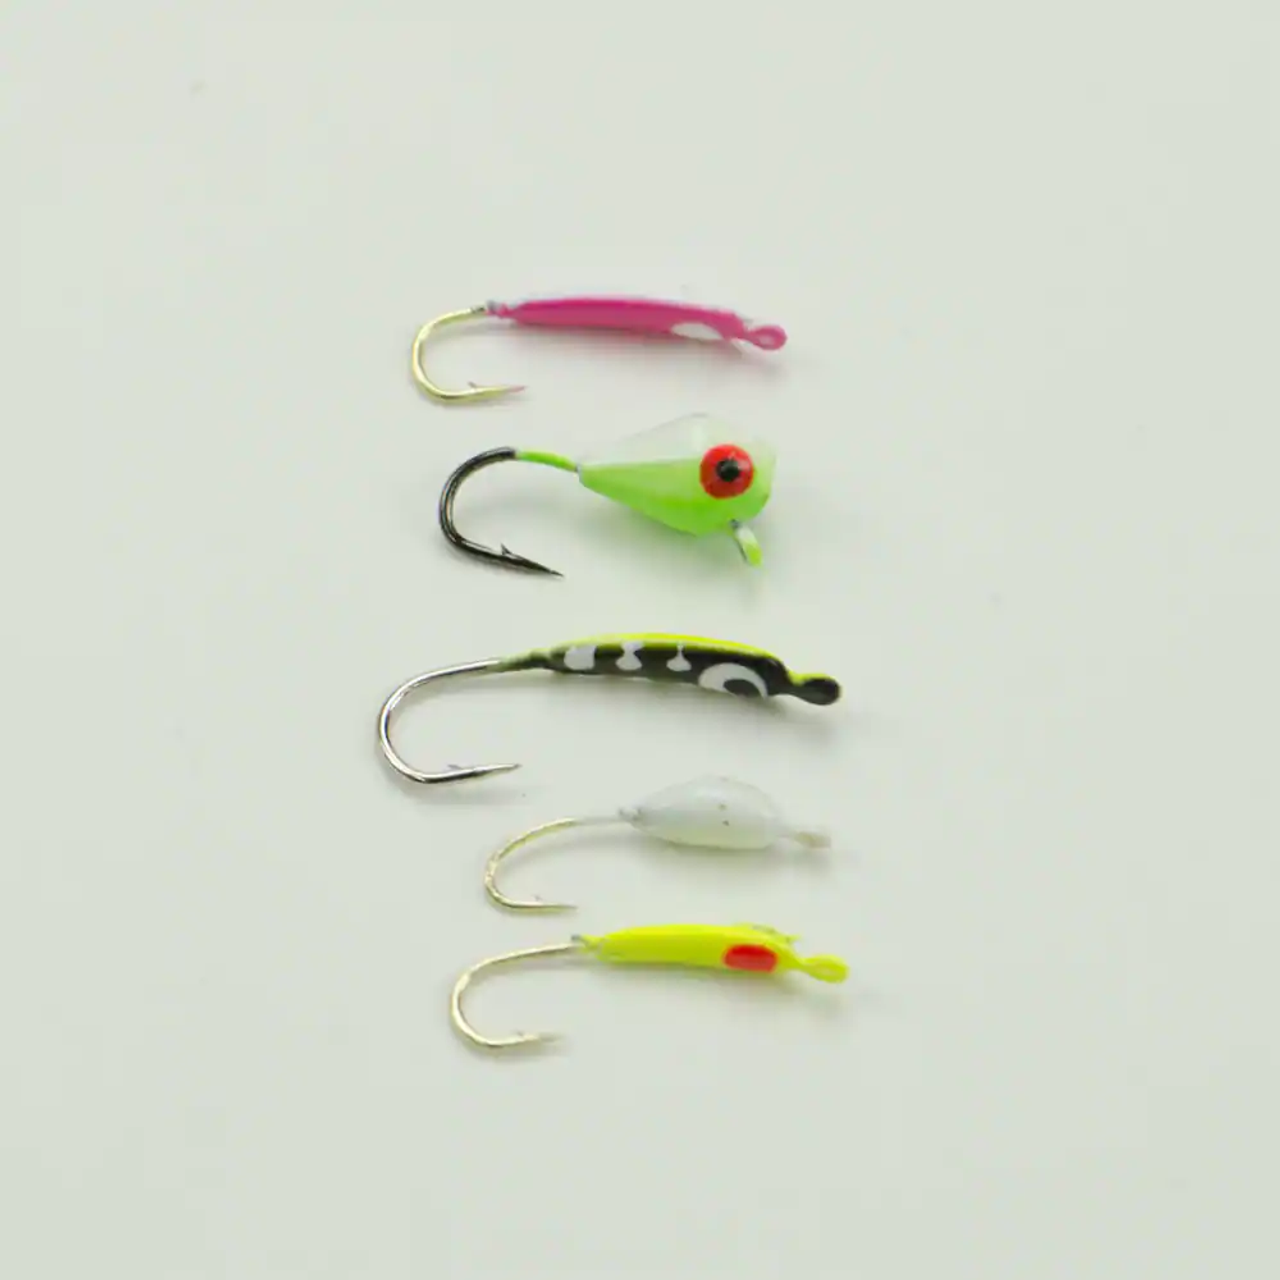 HT Hardwater Micro Jig #10, 5 Pack Assorted